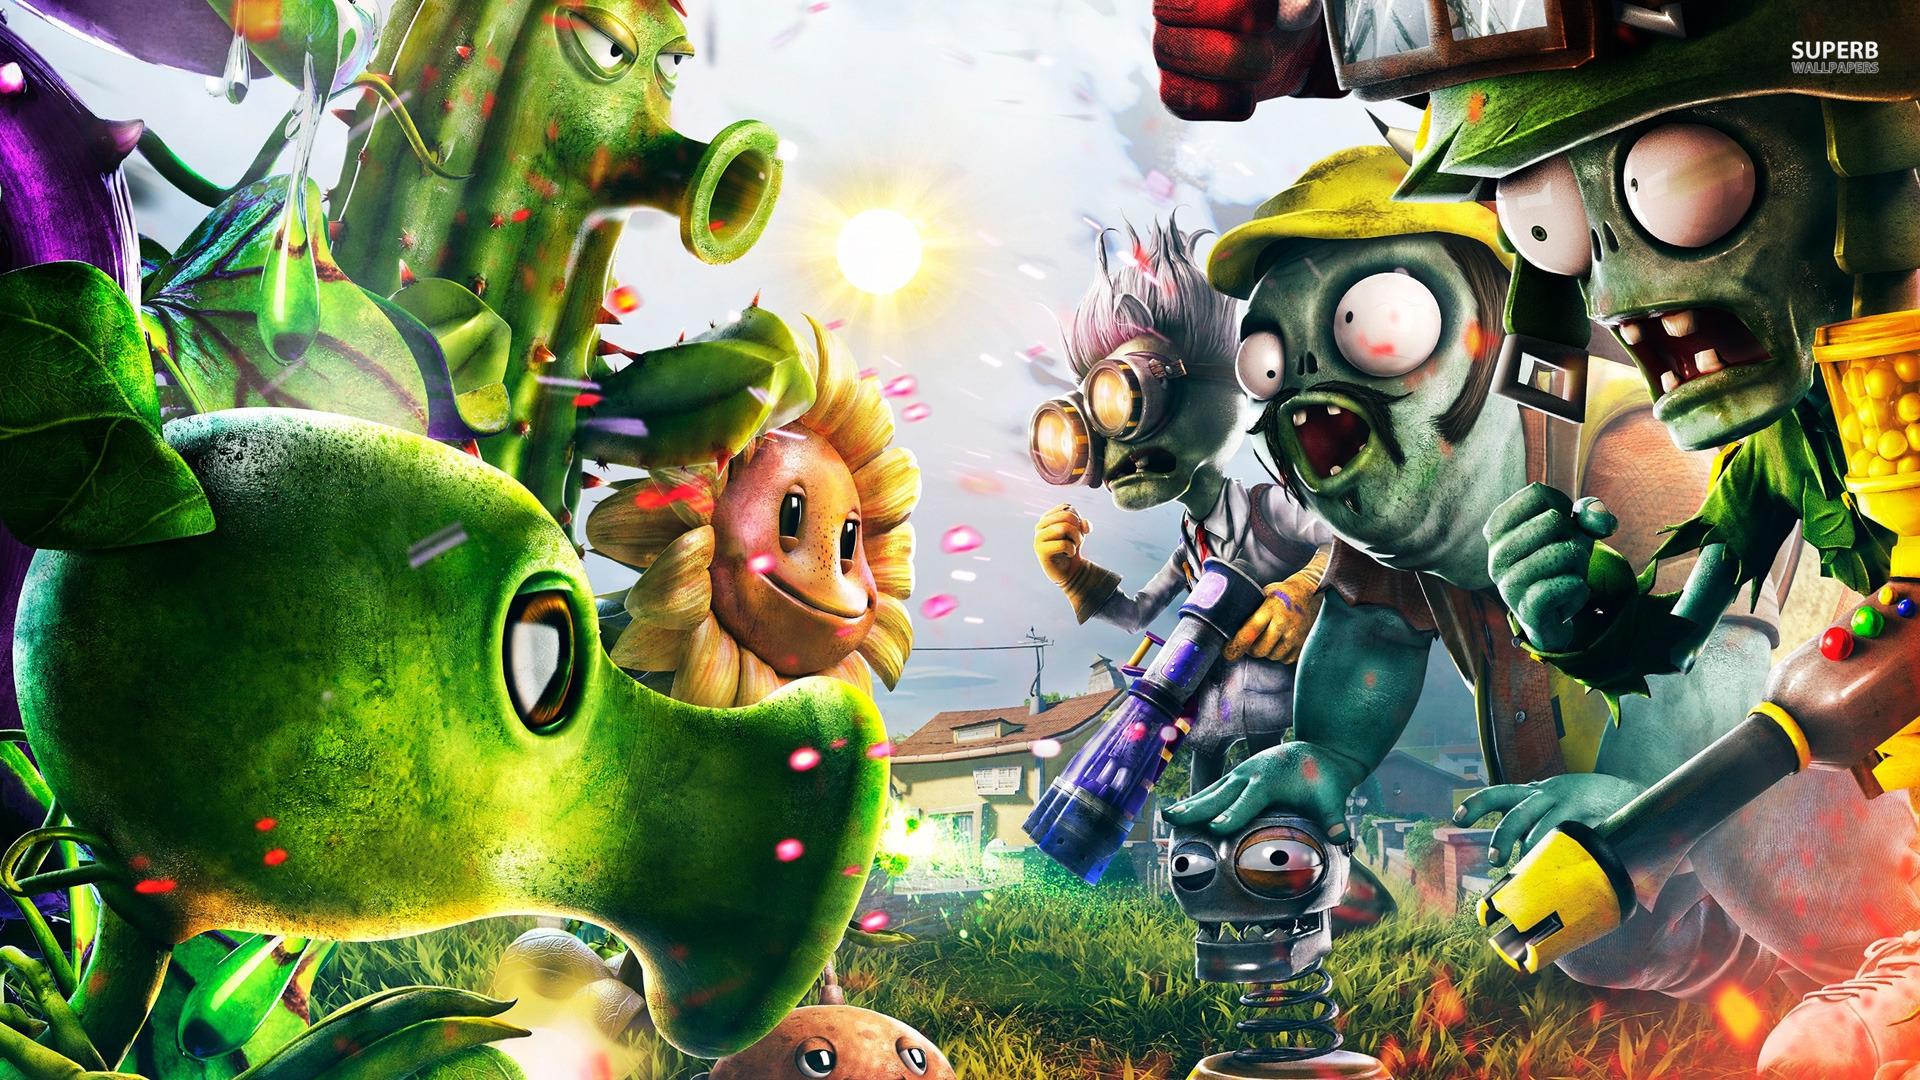 EA Reveals New Need For Speed And Plants Vs. Zombies Games